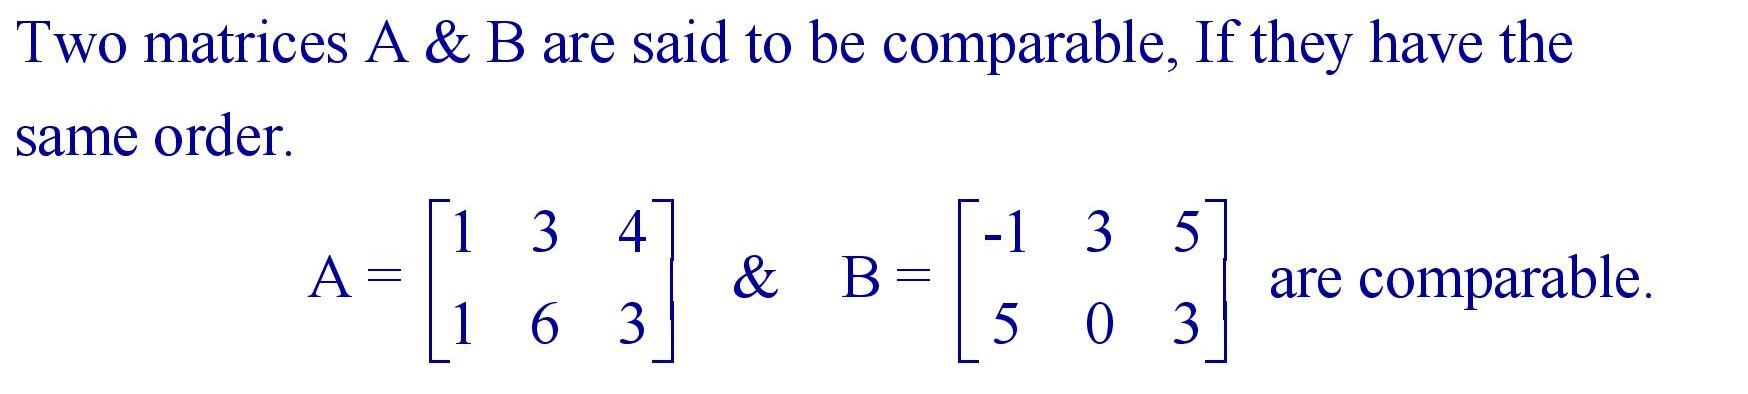 Comparable Matrices